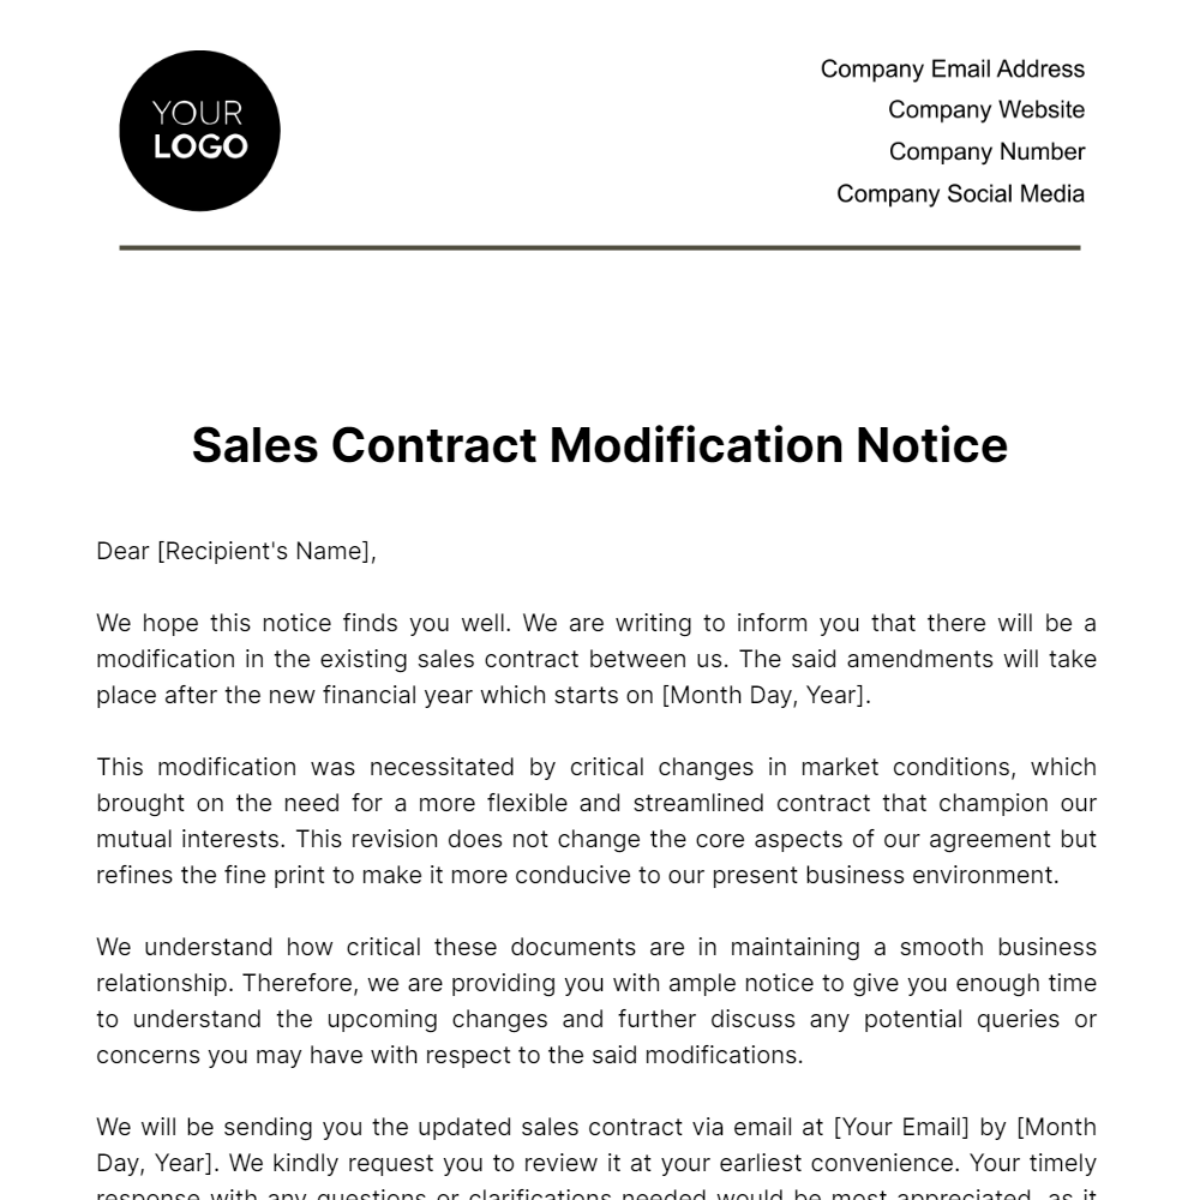 Free Sales Contract Modification Notice Template